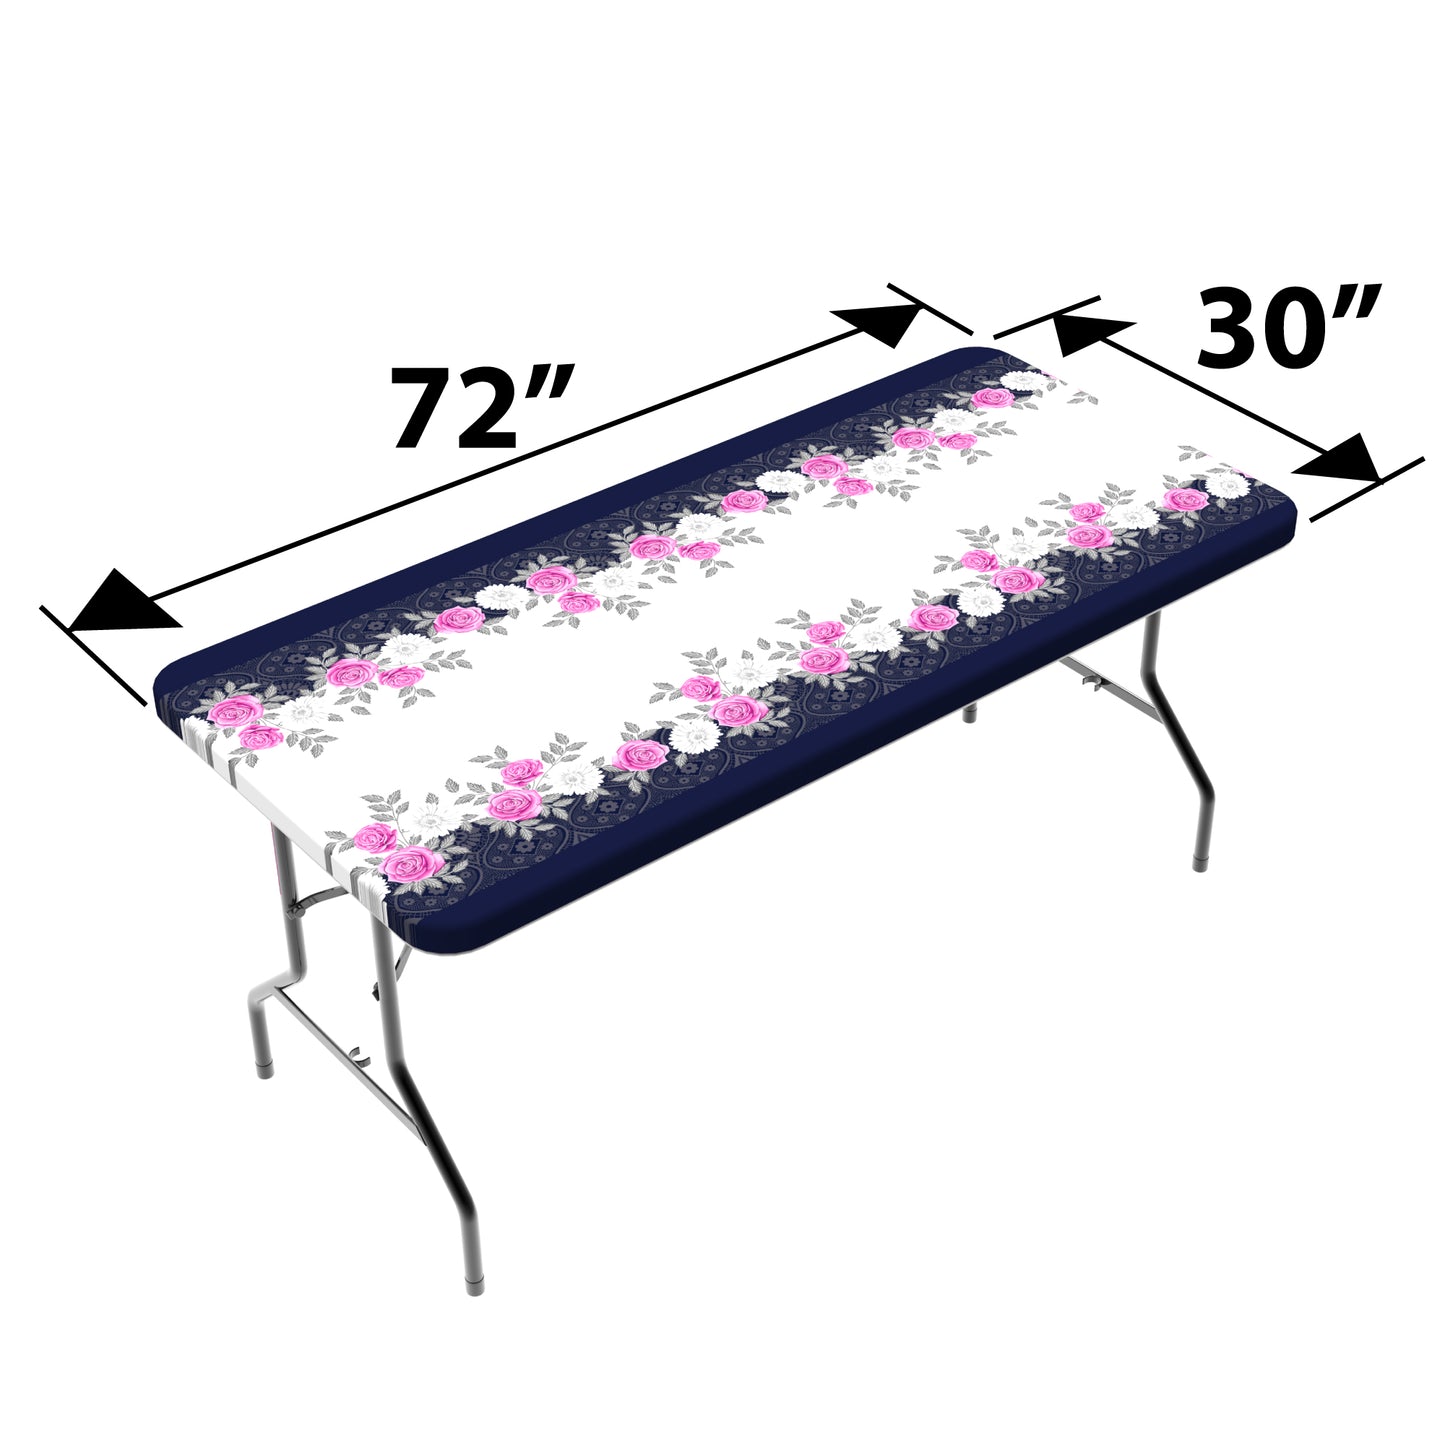 TableCloth PLUS 72" Roses Fitted Polyester Tablecloth for 6' Folding Tables displayed adorning a folding table